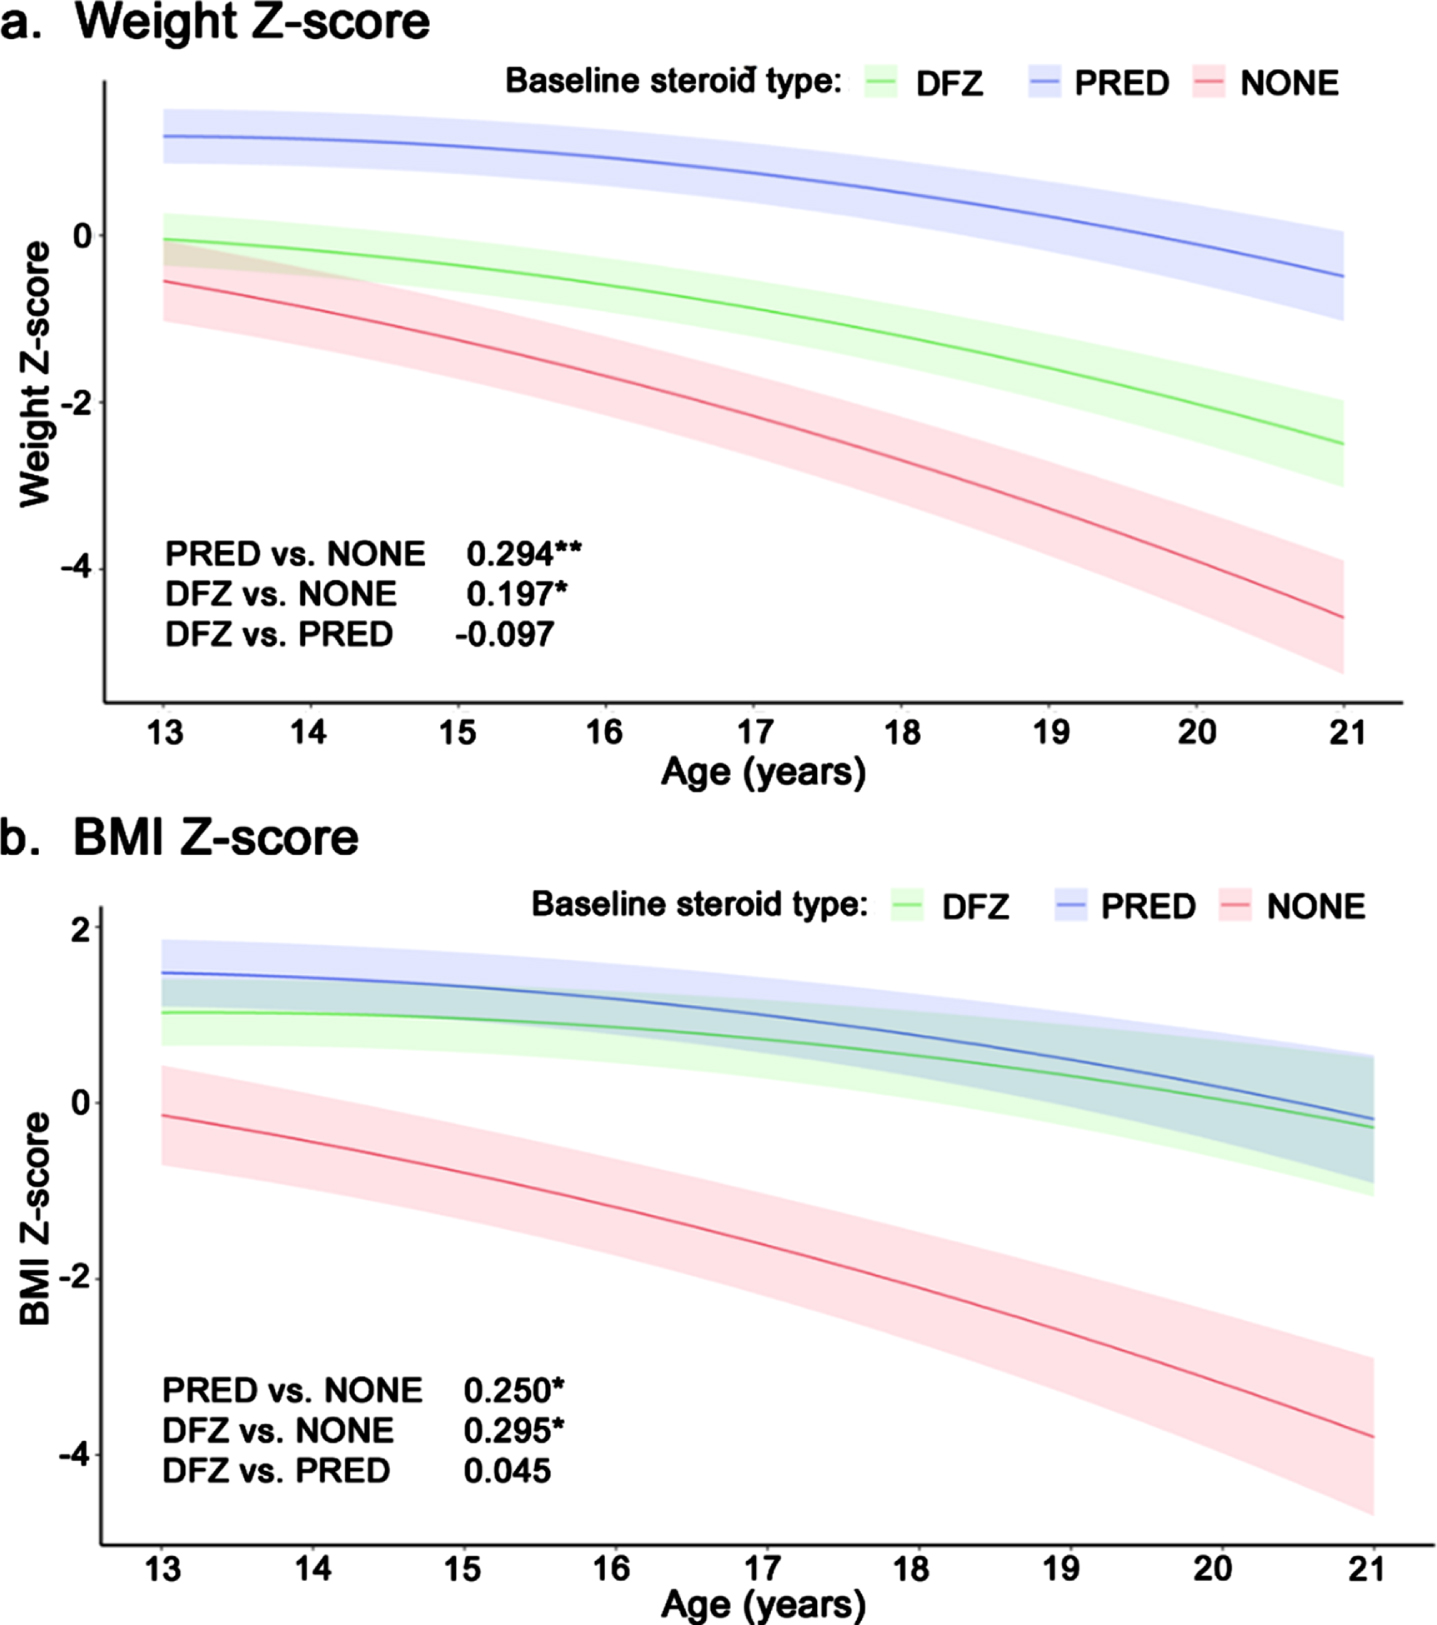 Longitudinal z-score for (a) weight and (b) BMI among non-ambulatory patients with DMD, by steroid use. Caption: Shaded regions are bounded by±1 standard error. Estimates overlaid on plot are slope differences between steroid groups. Slope differences are obtained from two model specifications, which differ only by the baseline steroid reference group (none or prednisone). **p < 0.01, *p < 0.05. Abbreviations: BMI, body mass index; DFZ, deflazacort; DMD, Duchenne muscular dystrophy; PRED, prednisone.